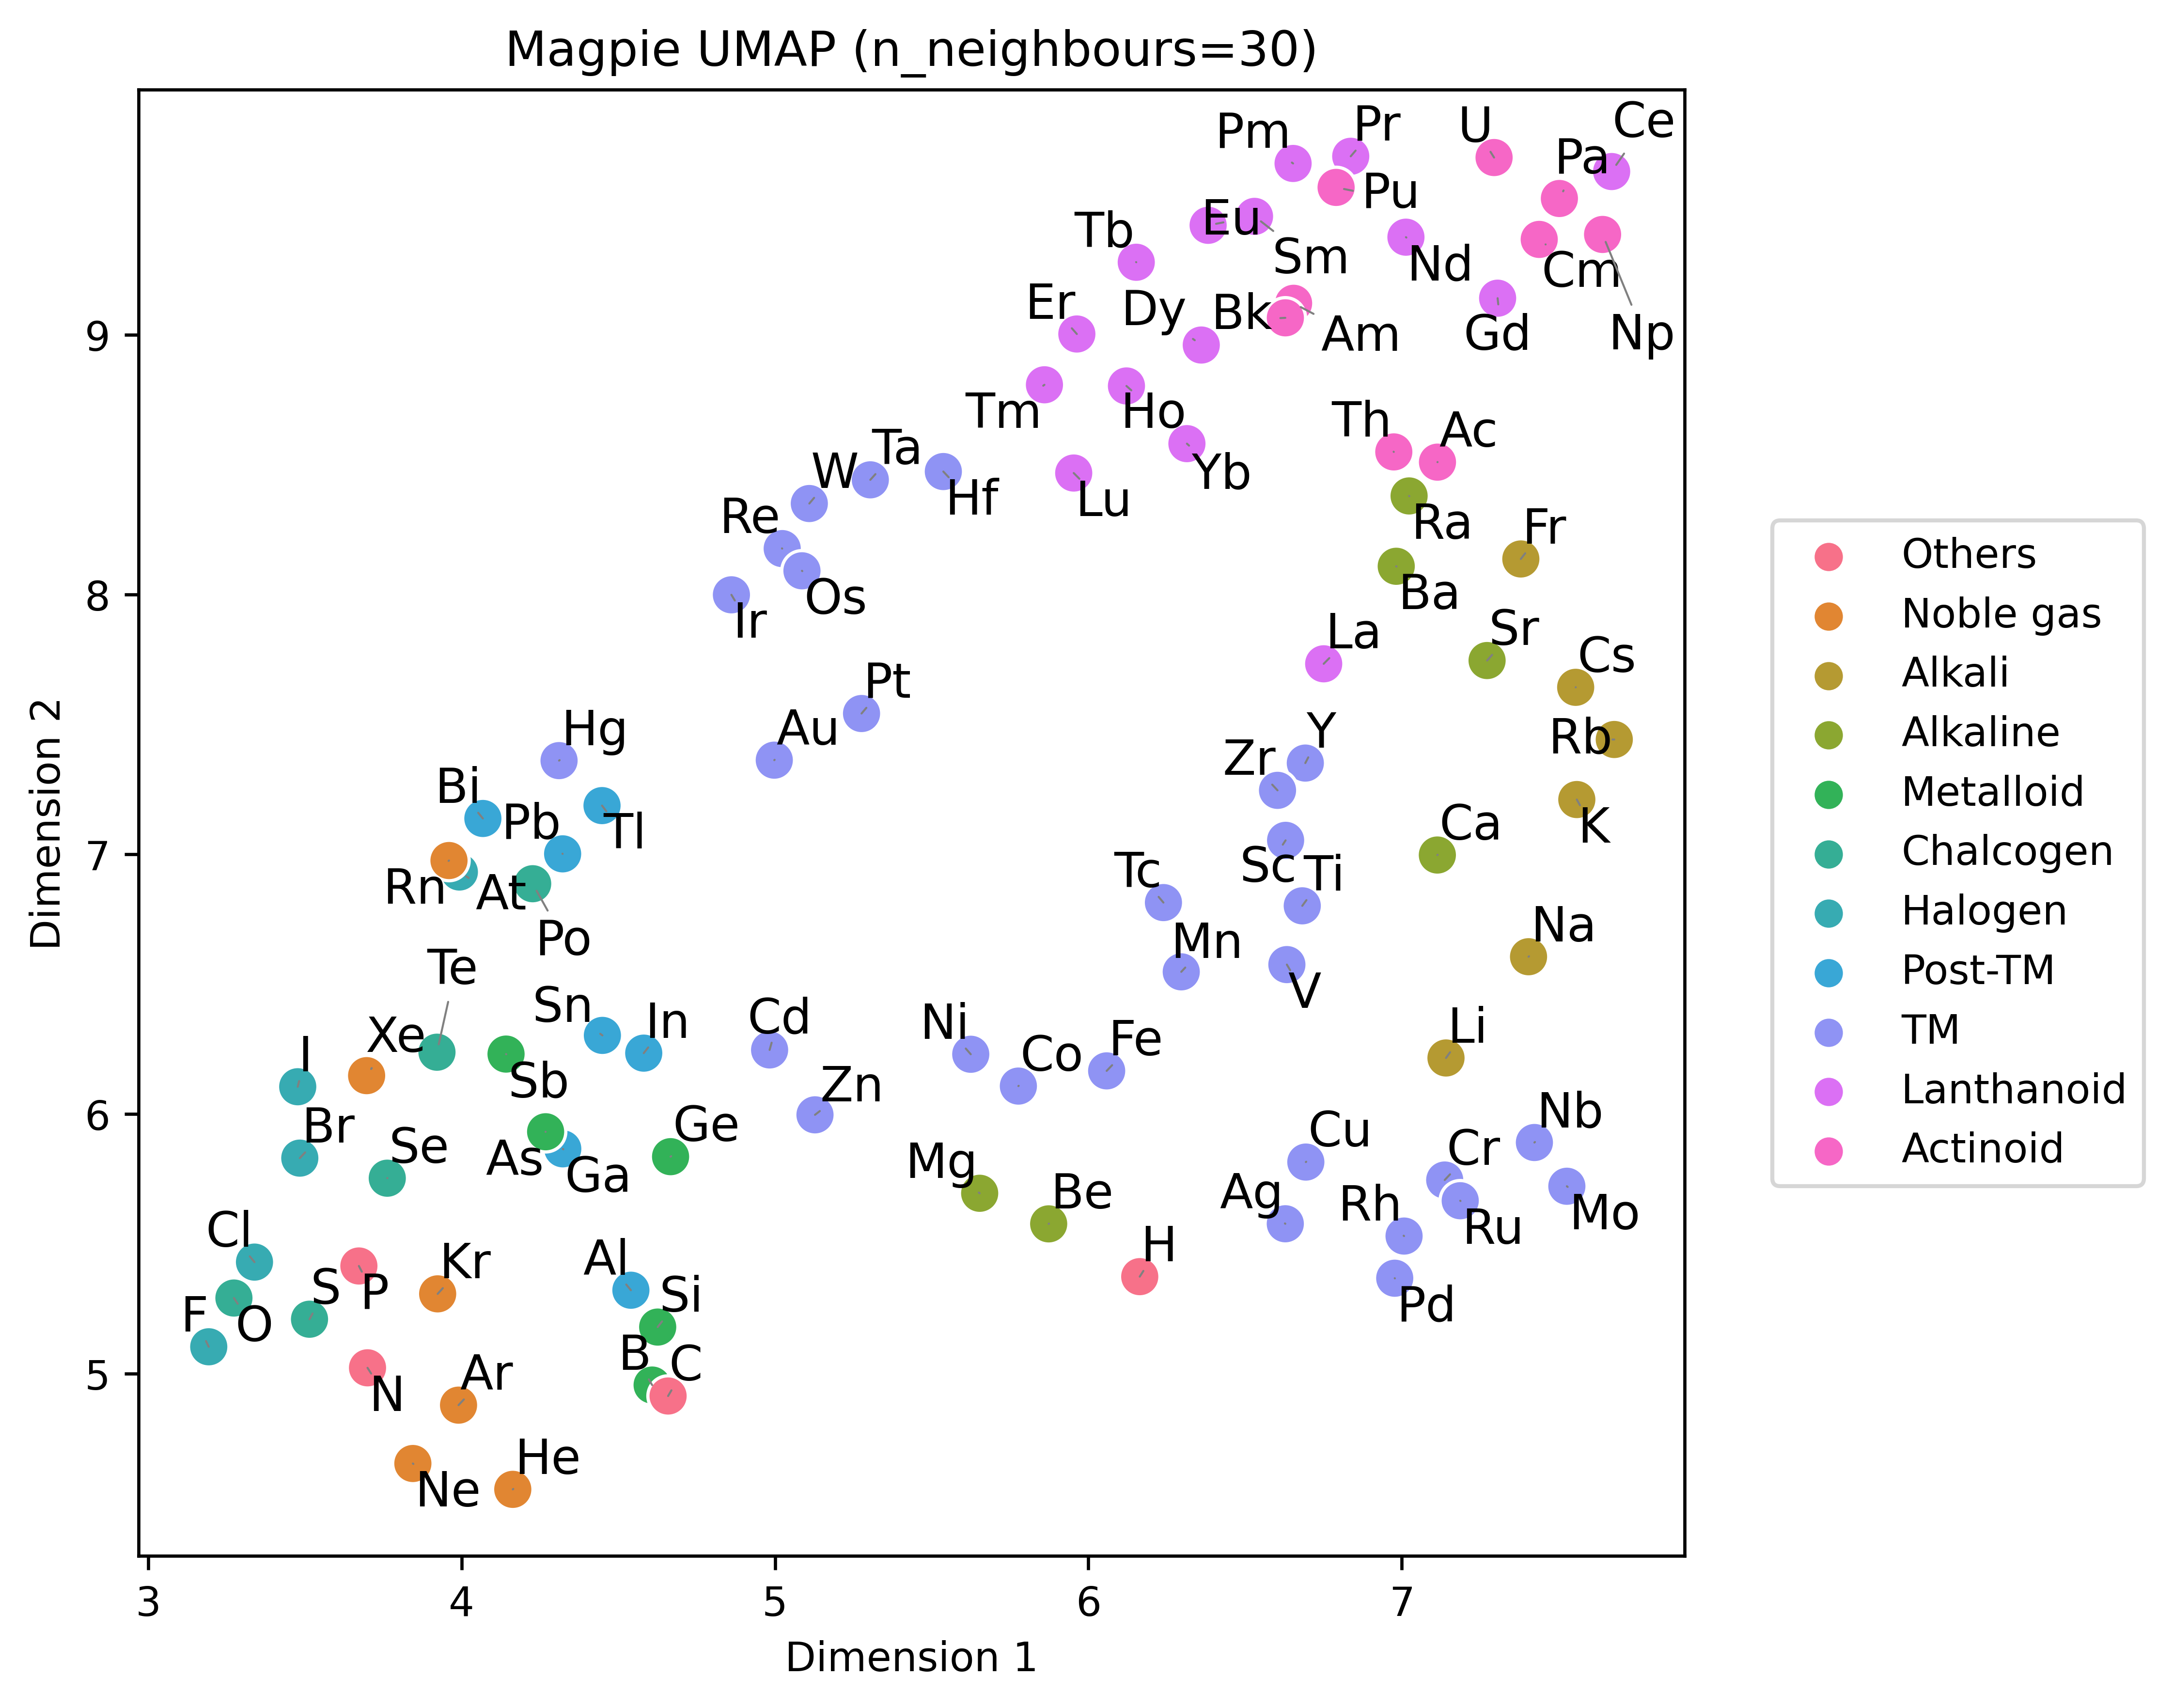 Scatter plot of the Magpie representation reduced to 2 dimensions using UMAP